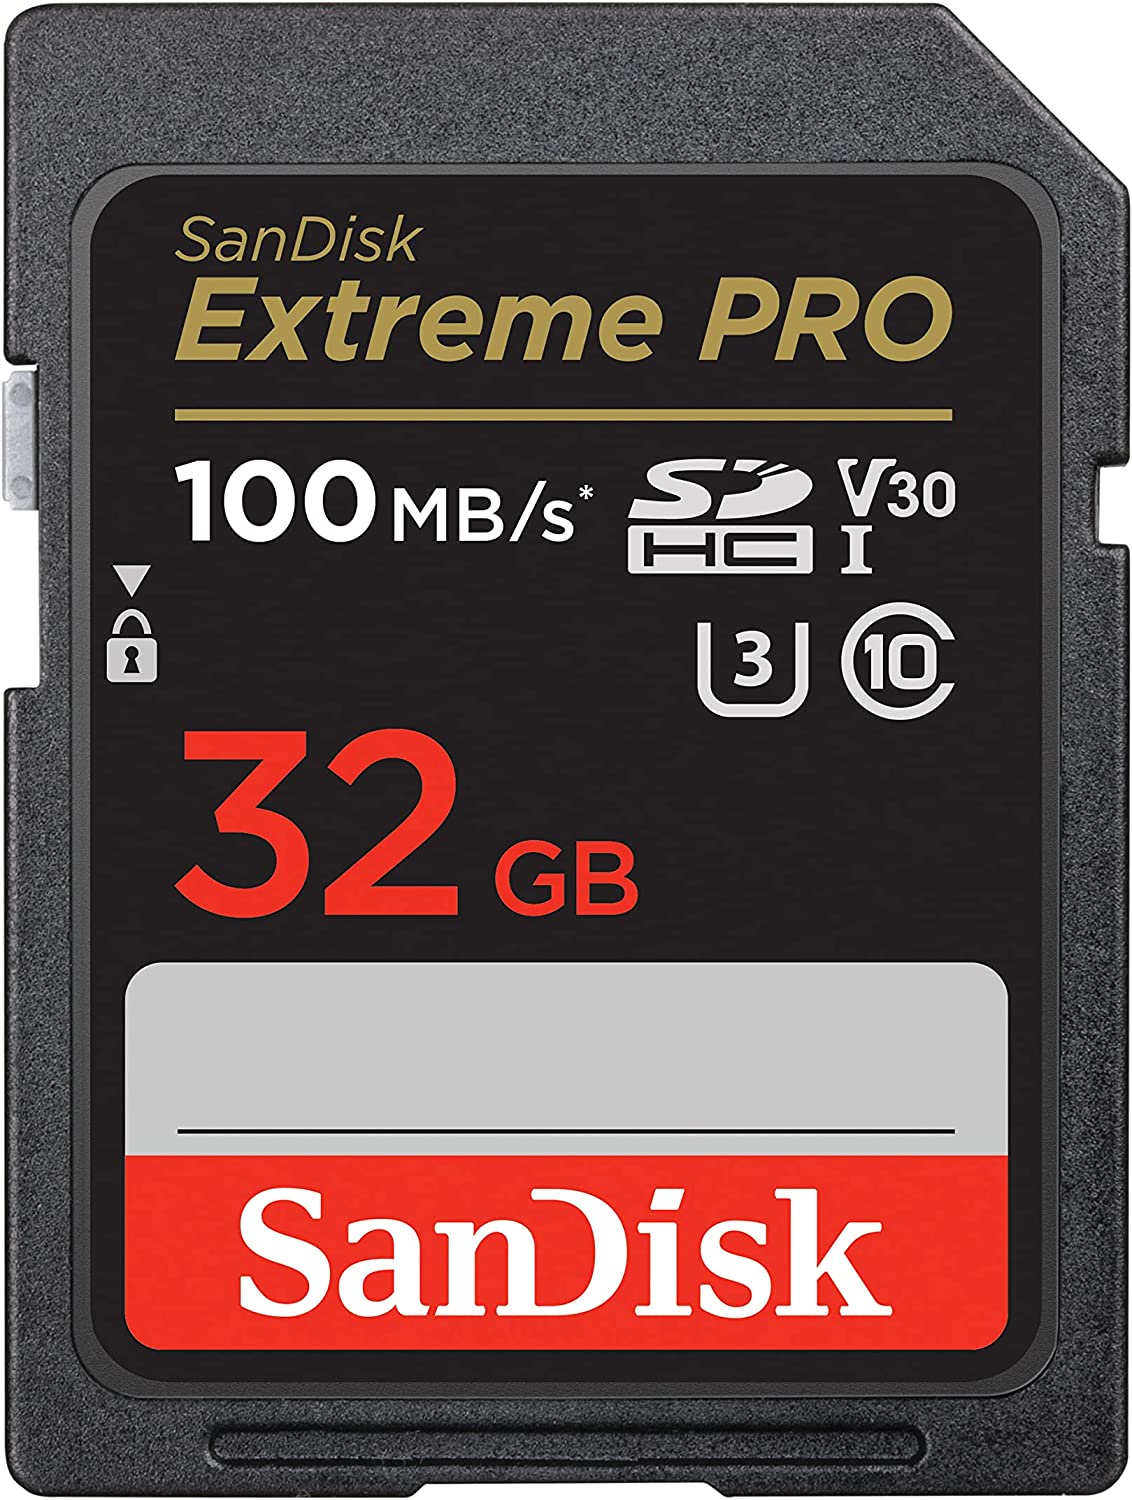 SanDisk Extreme Pro 100MB/s 32GB SDHC UHS-I Memory Card